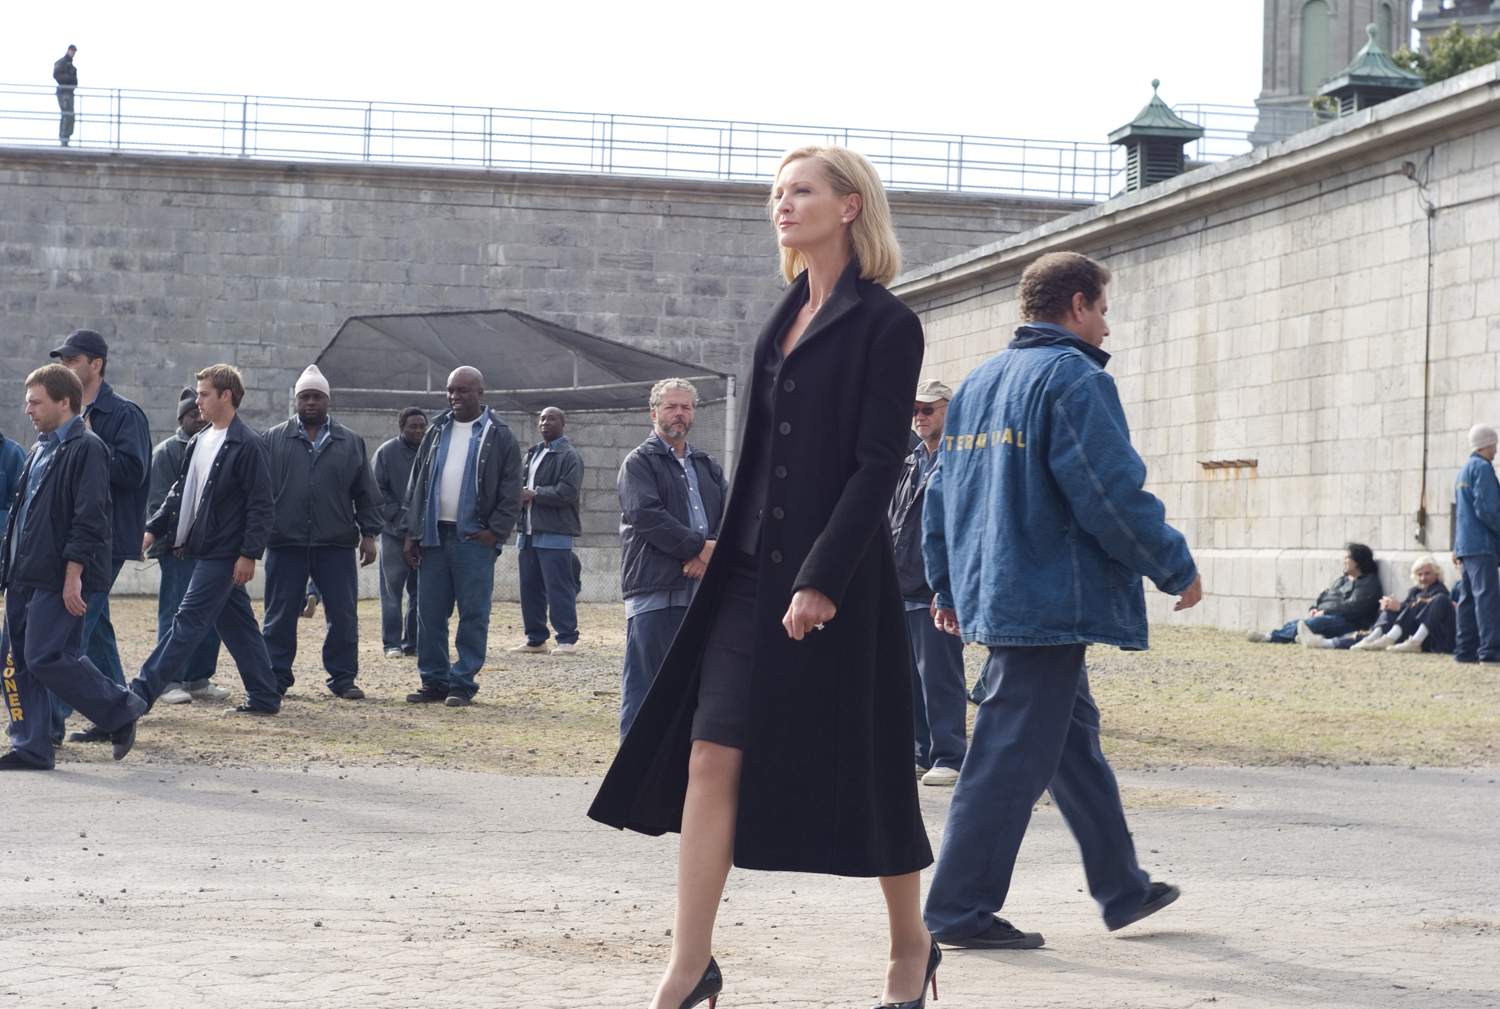 JOAN ALLEN in an action-thriller set in the post-industrial wasteland of tomorrow, with the world's most brutal sporting event as its backdrop - Death Race. Photo Credit: Takashi Seida.